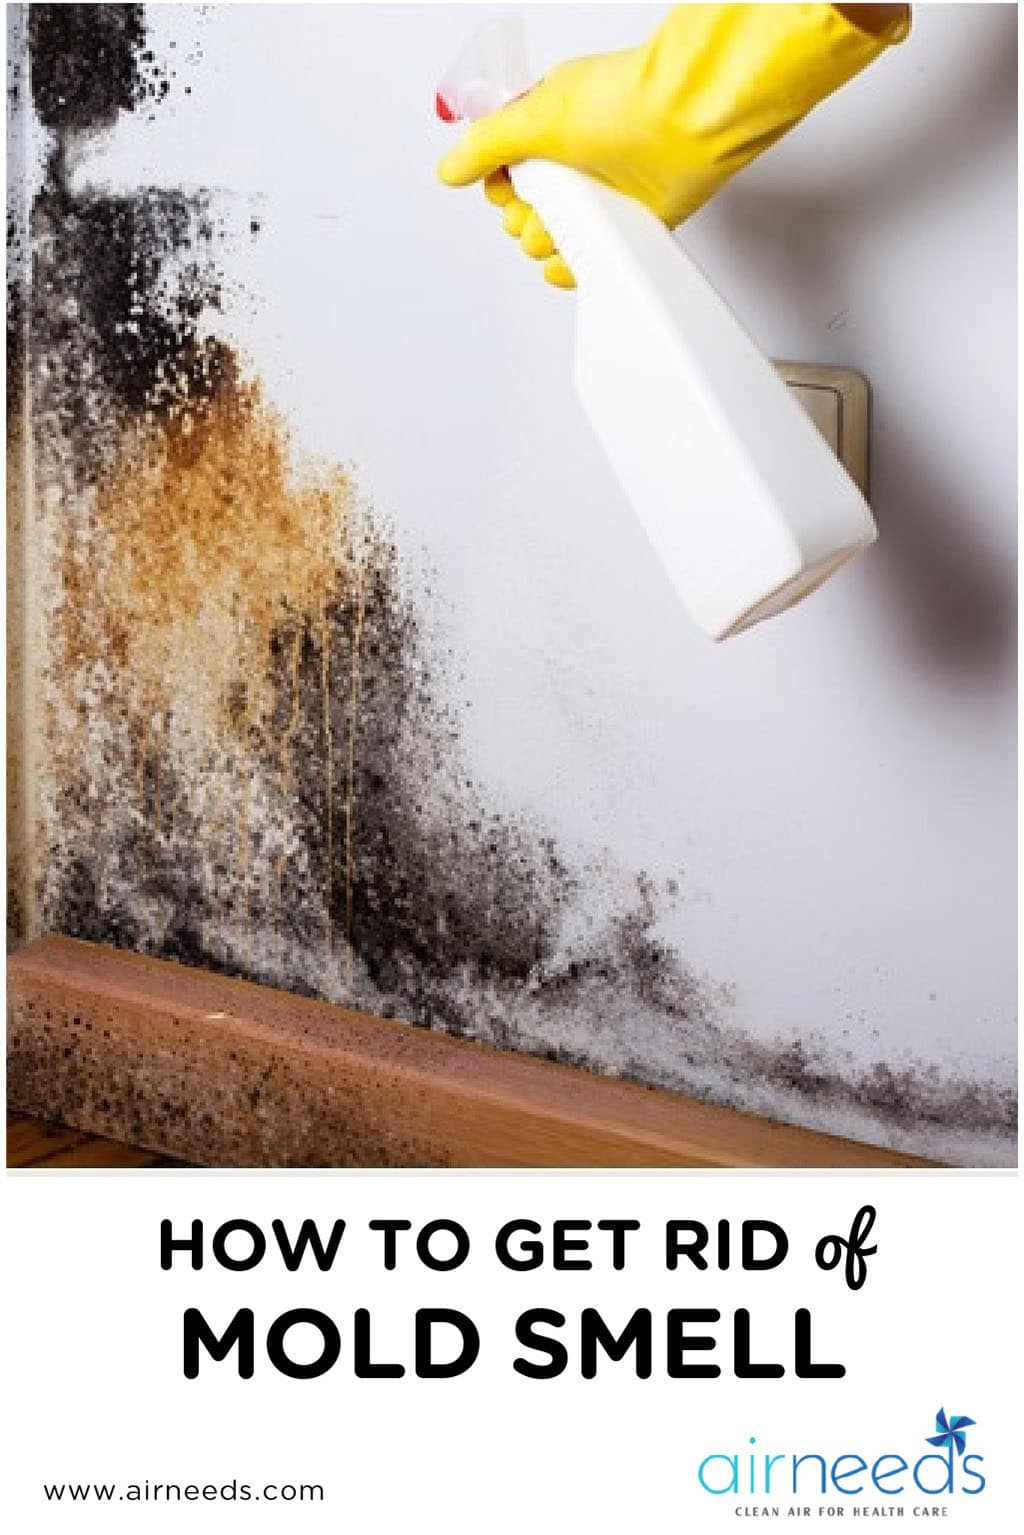 4 Tips on How to Get Rid of Mold Smell in the House